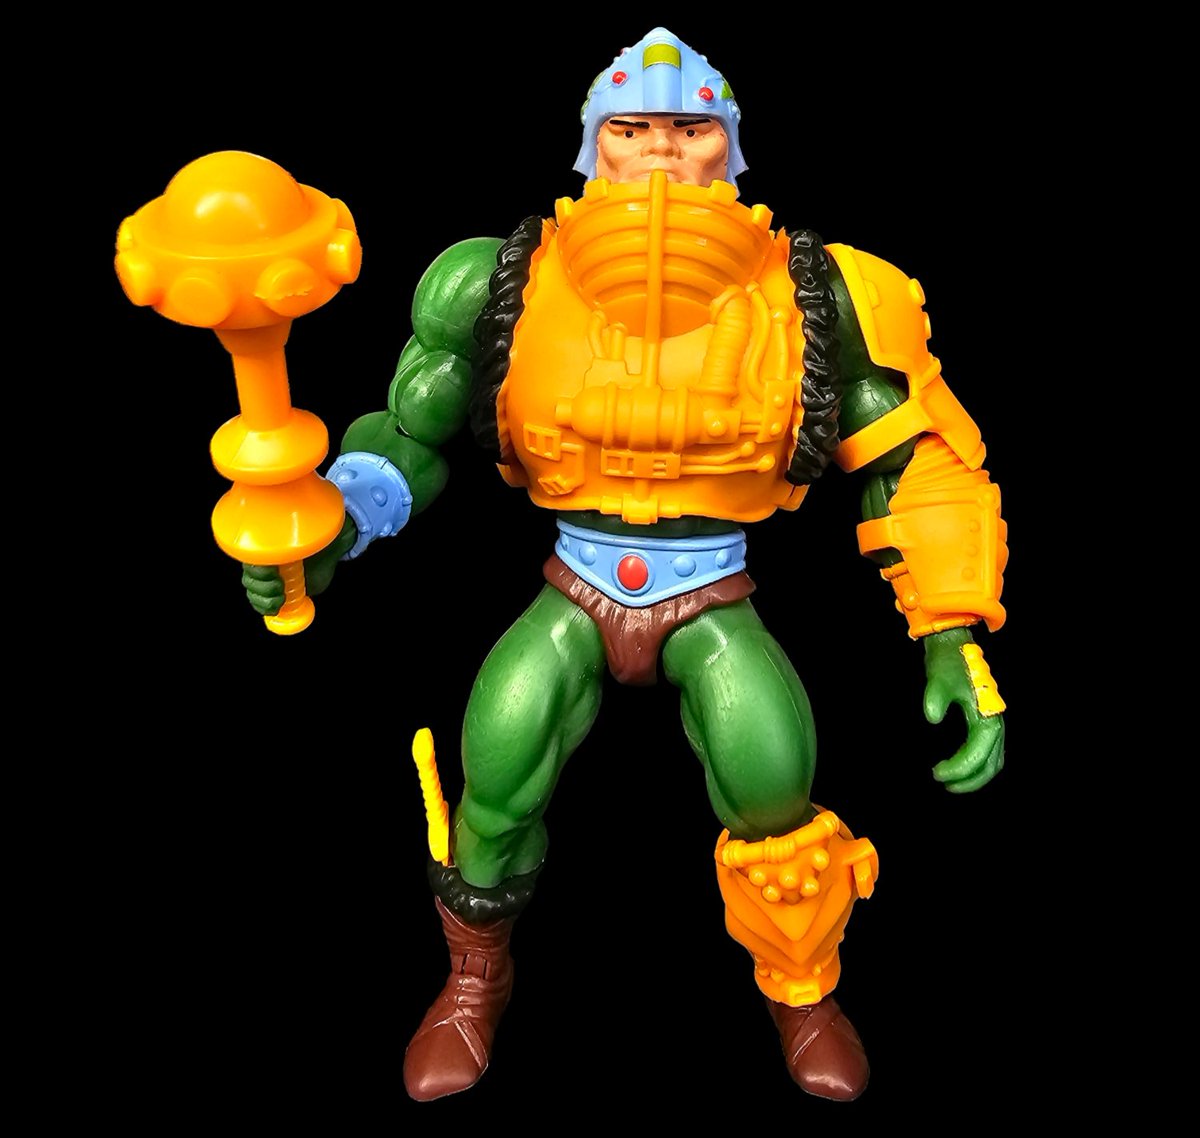 Lords of Power Man-At-Arms. My favorite from the 5 pack #Motu #HeMan #MastersoftheUniverse #Origins #ActionFigures #MailCall #Motuesday